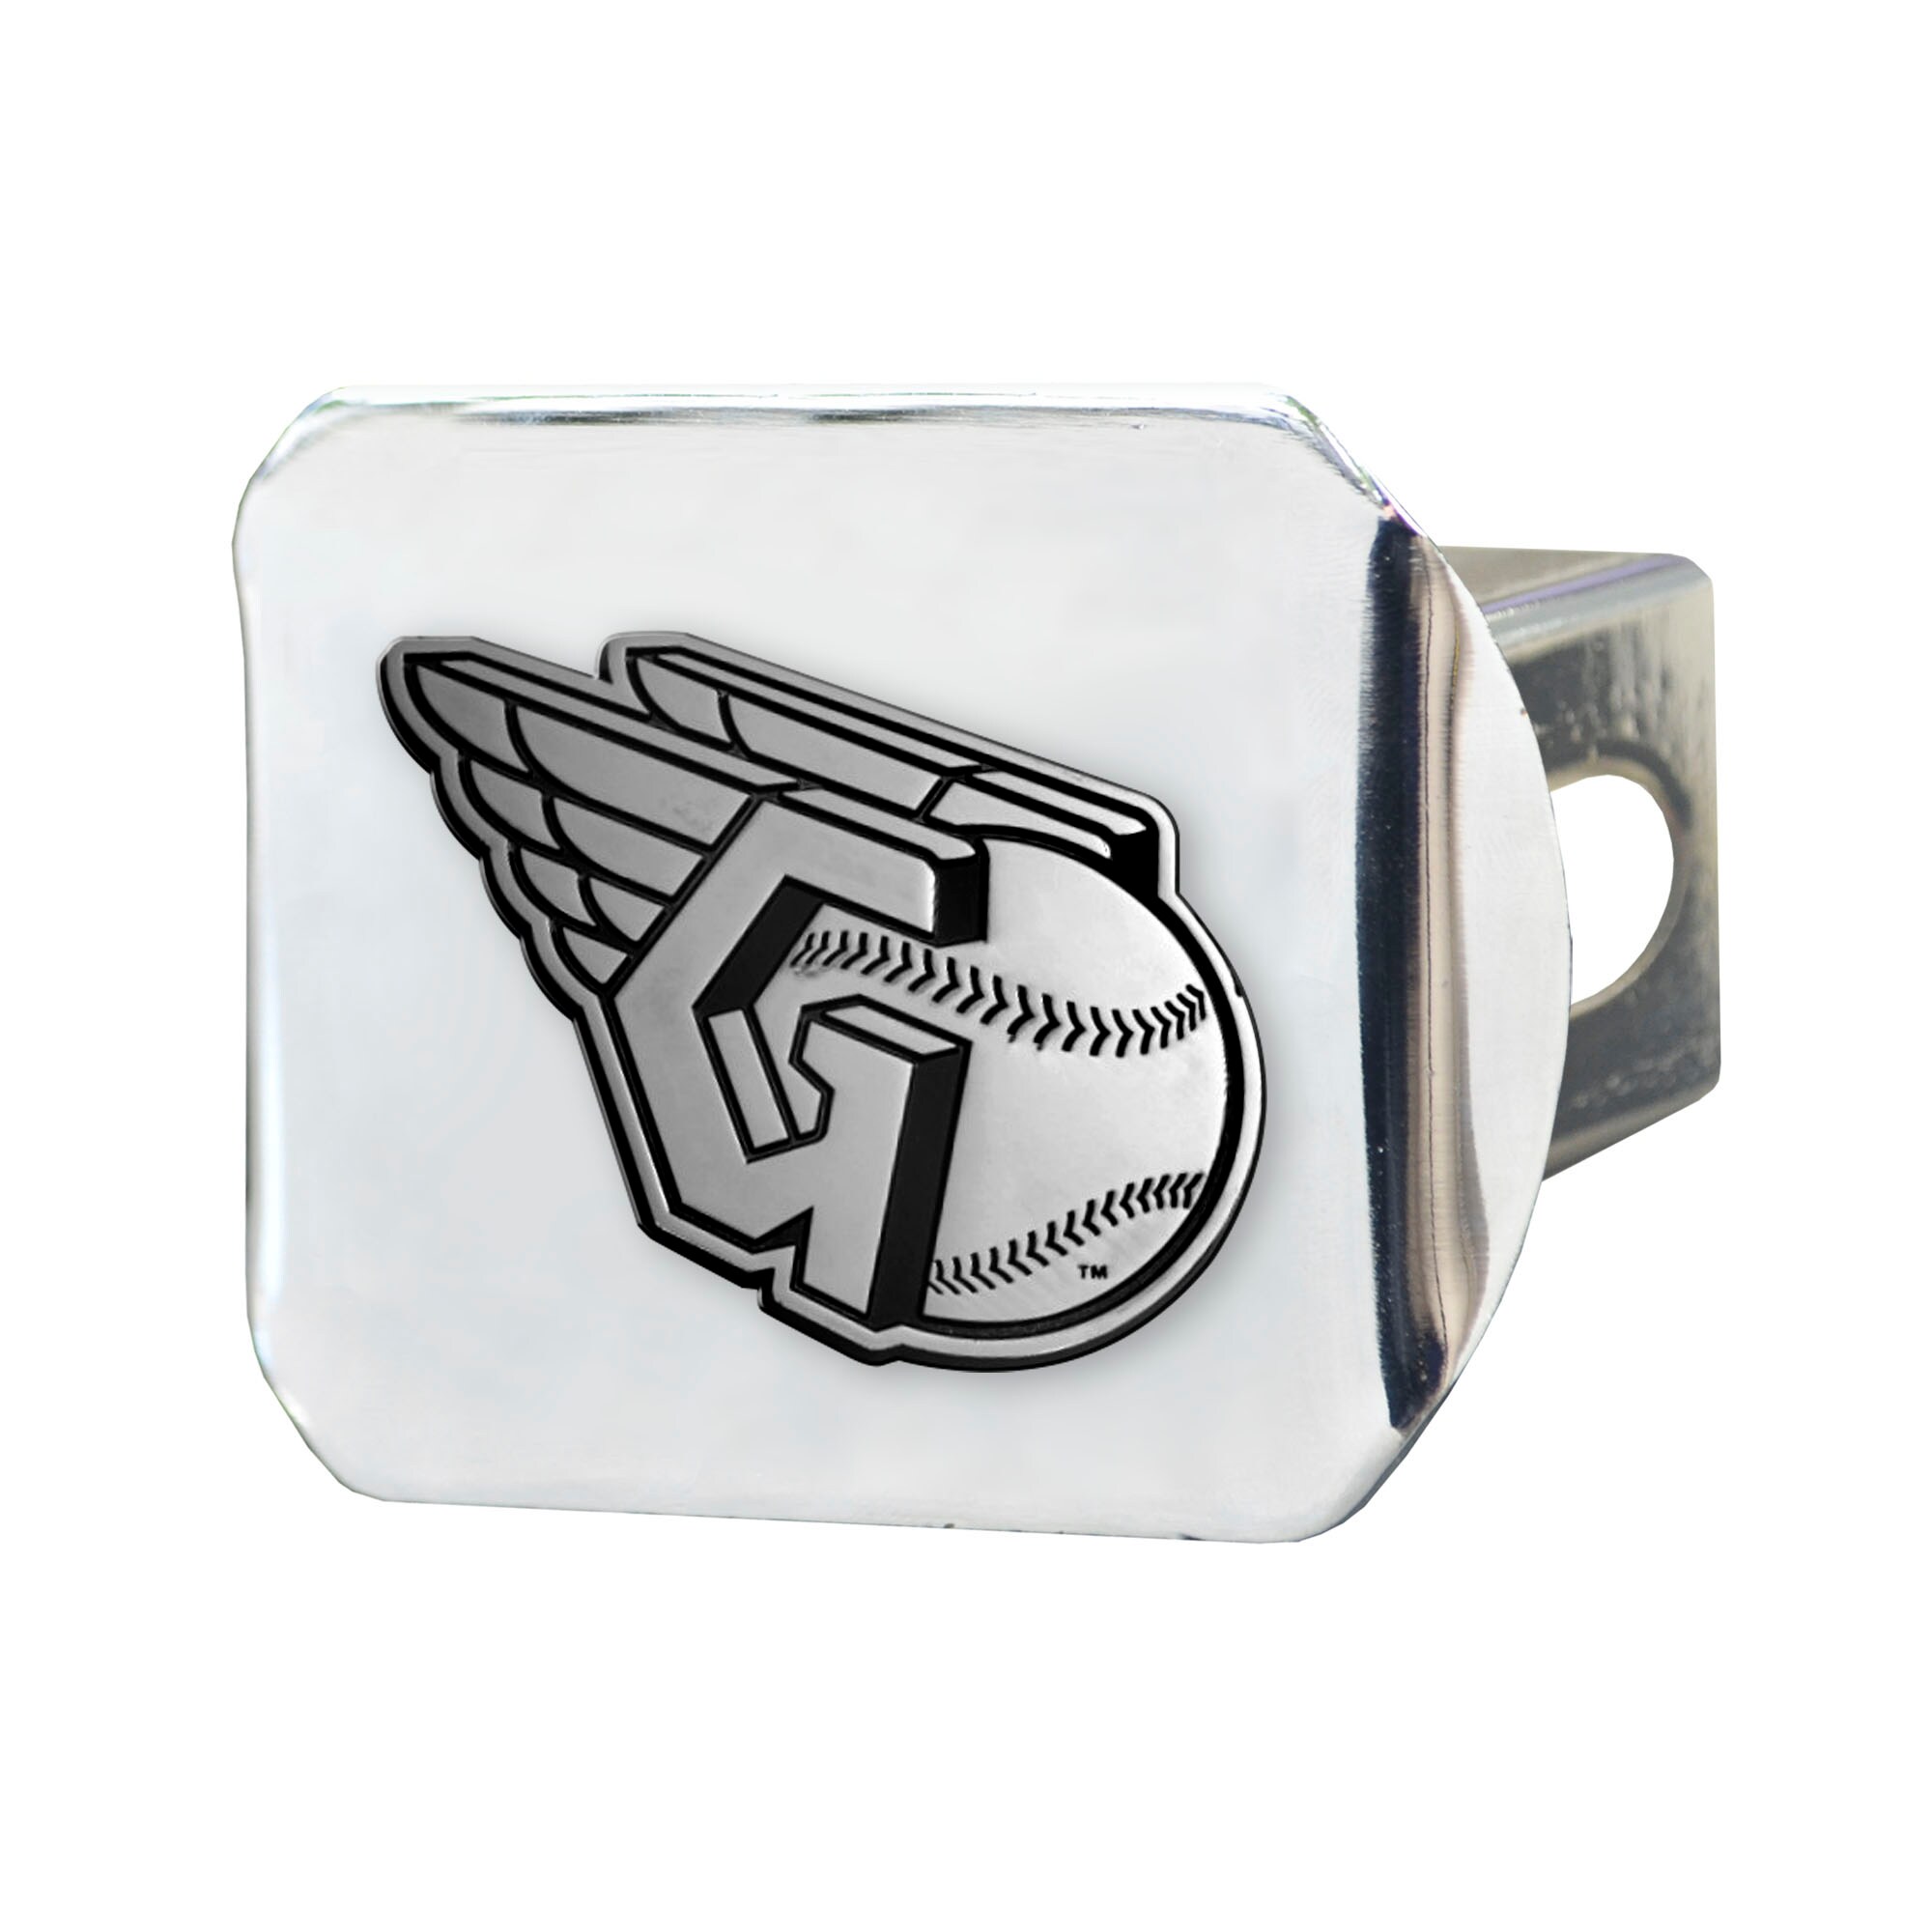 FANMATS Philadelphia Eagles Hitch Cover at